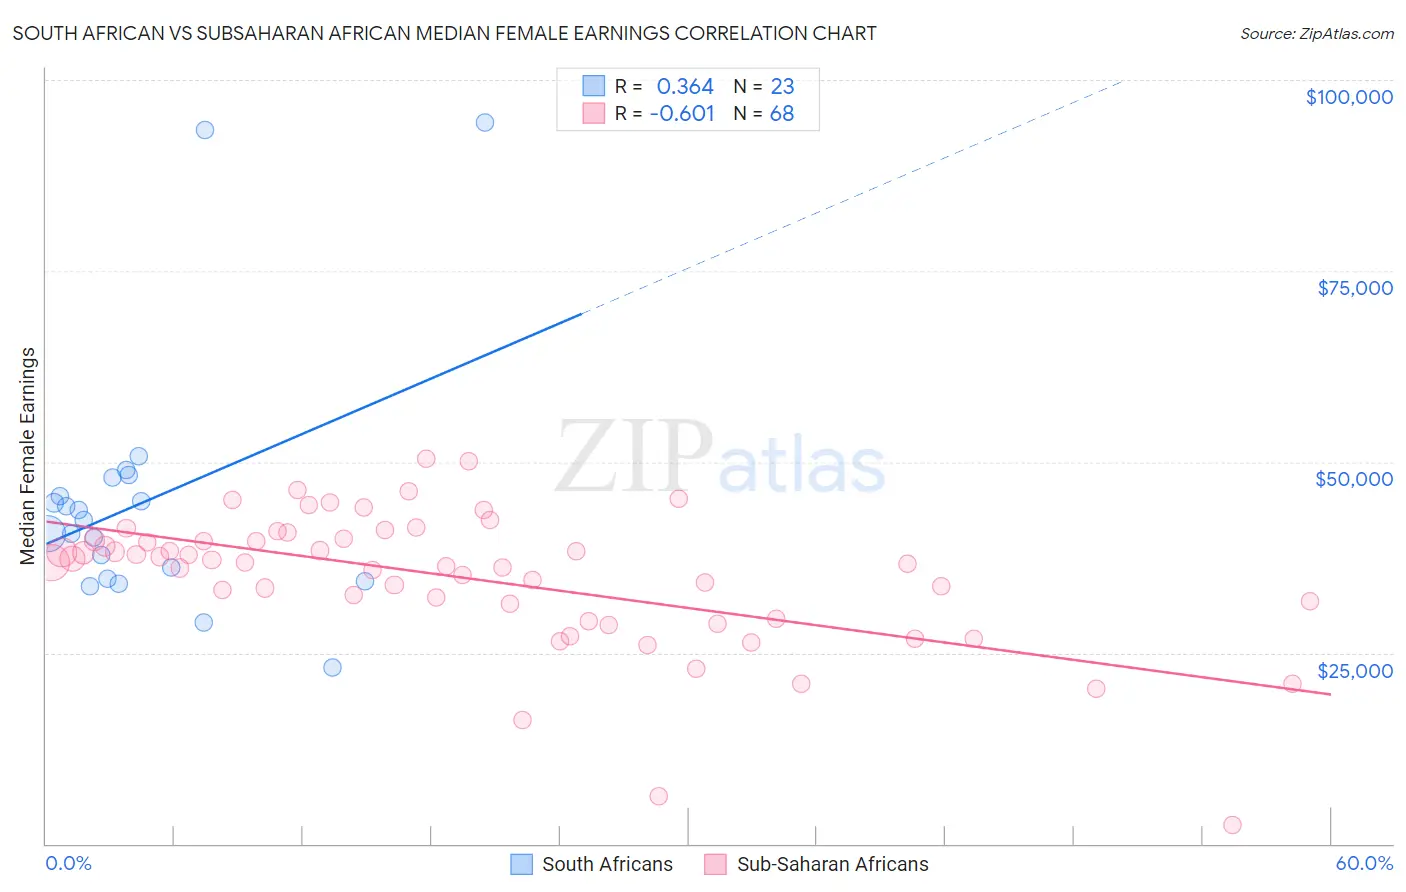 South African vs Subsaharan African Median Female Earnings